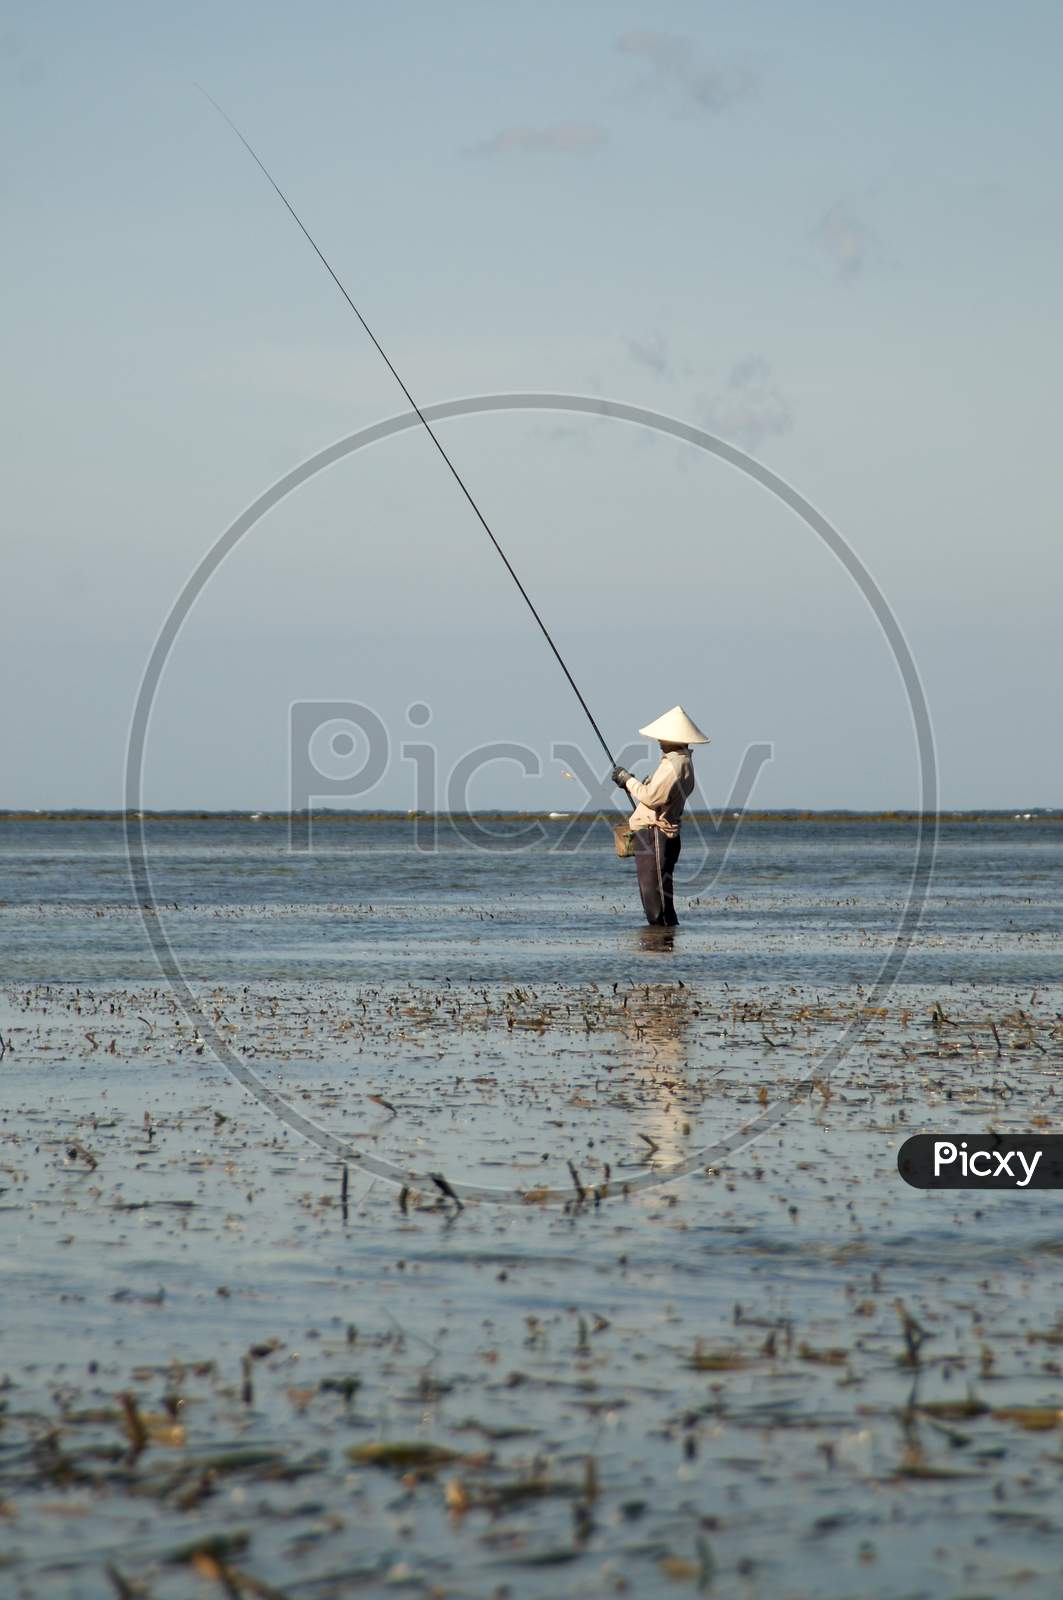 Typical Balinese Fisherman Standing In Shallow Water